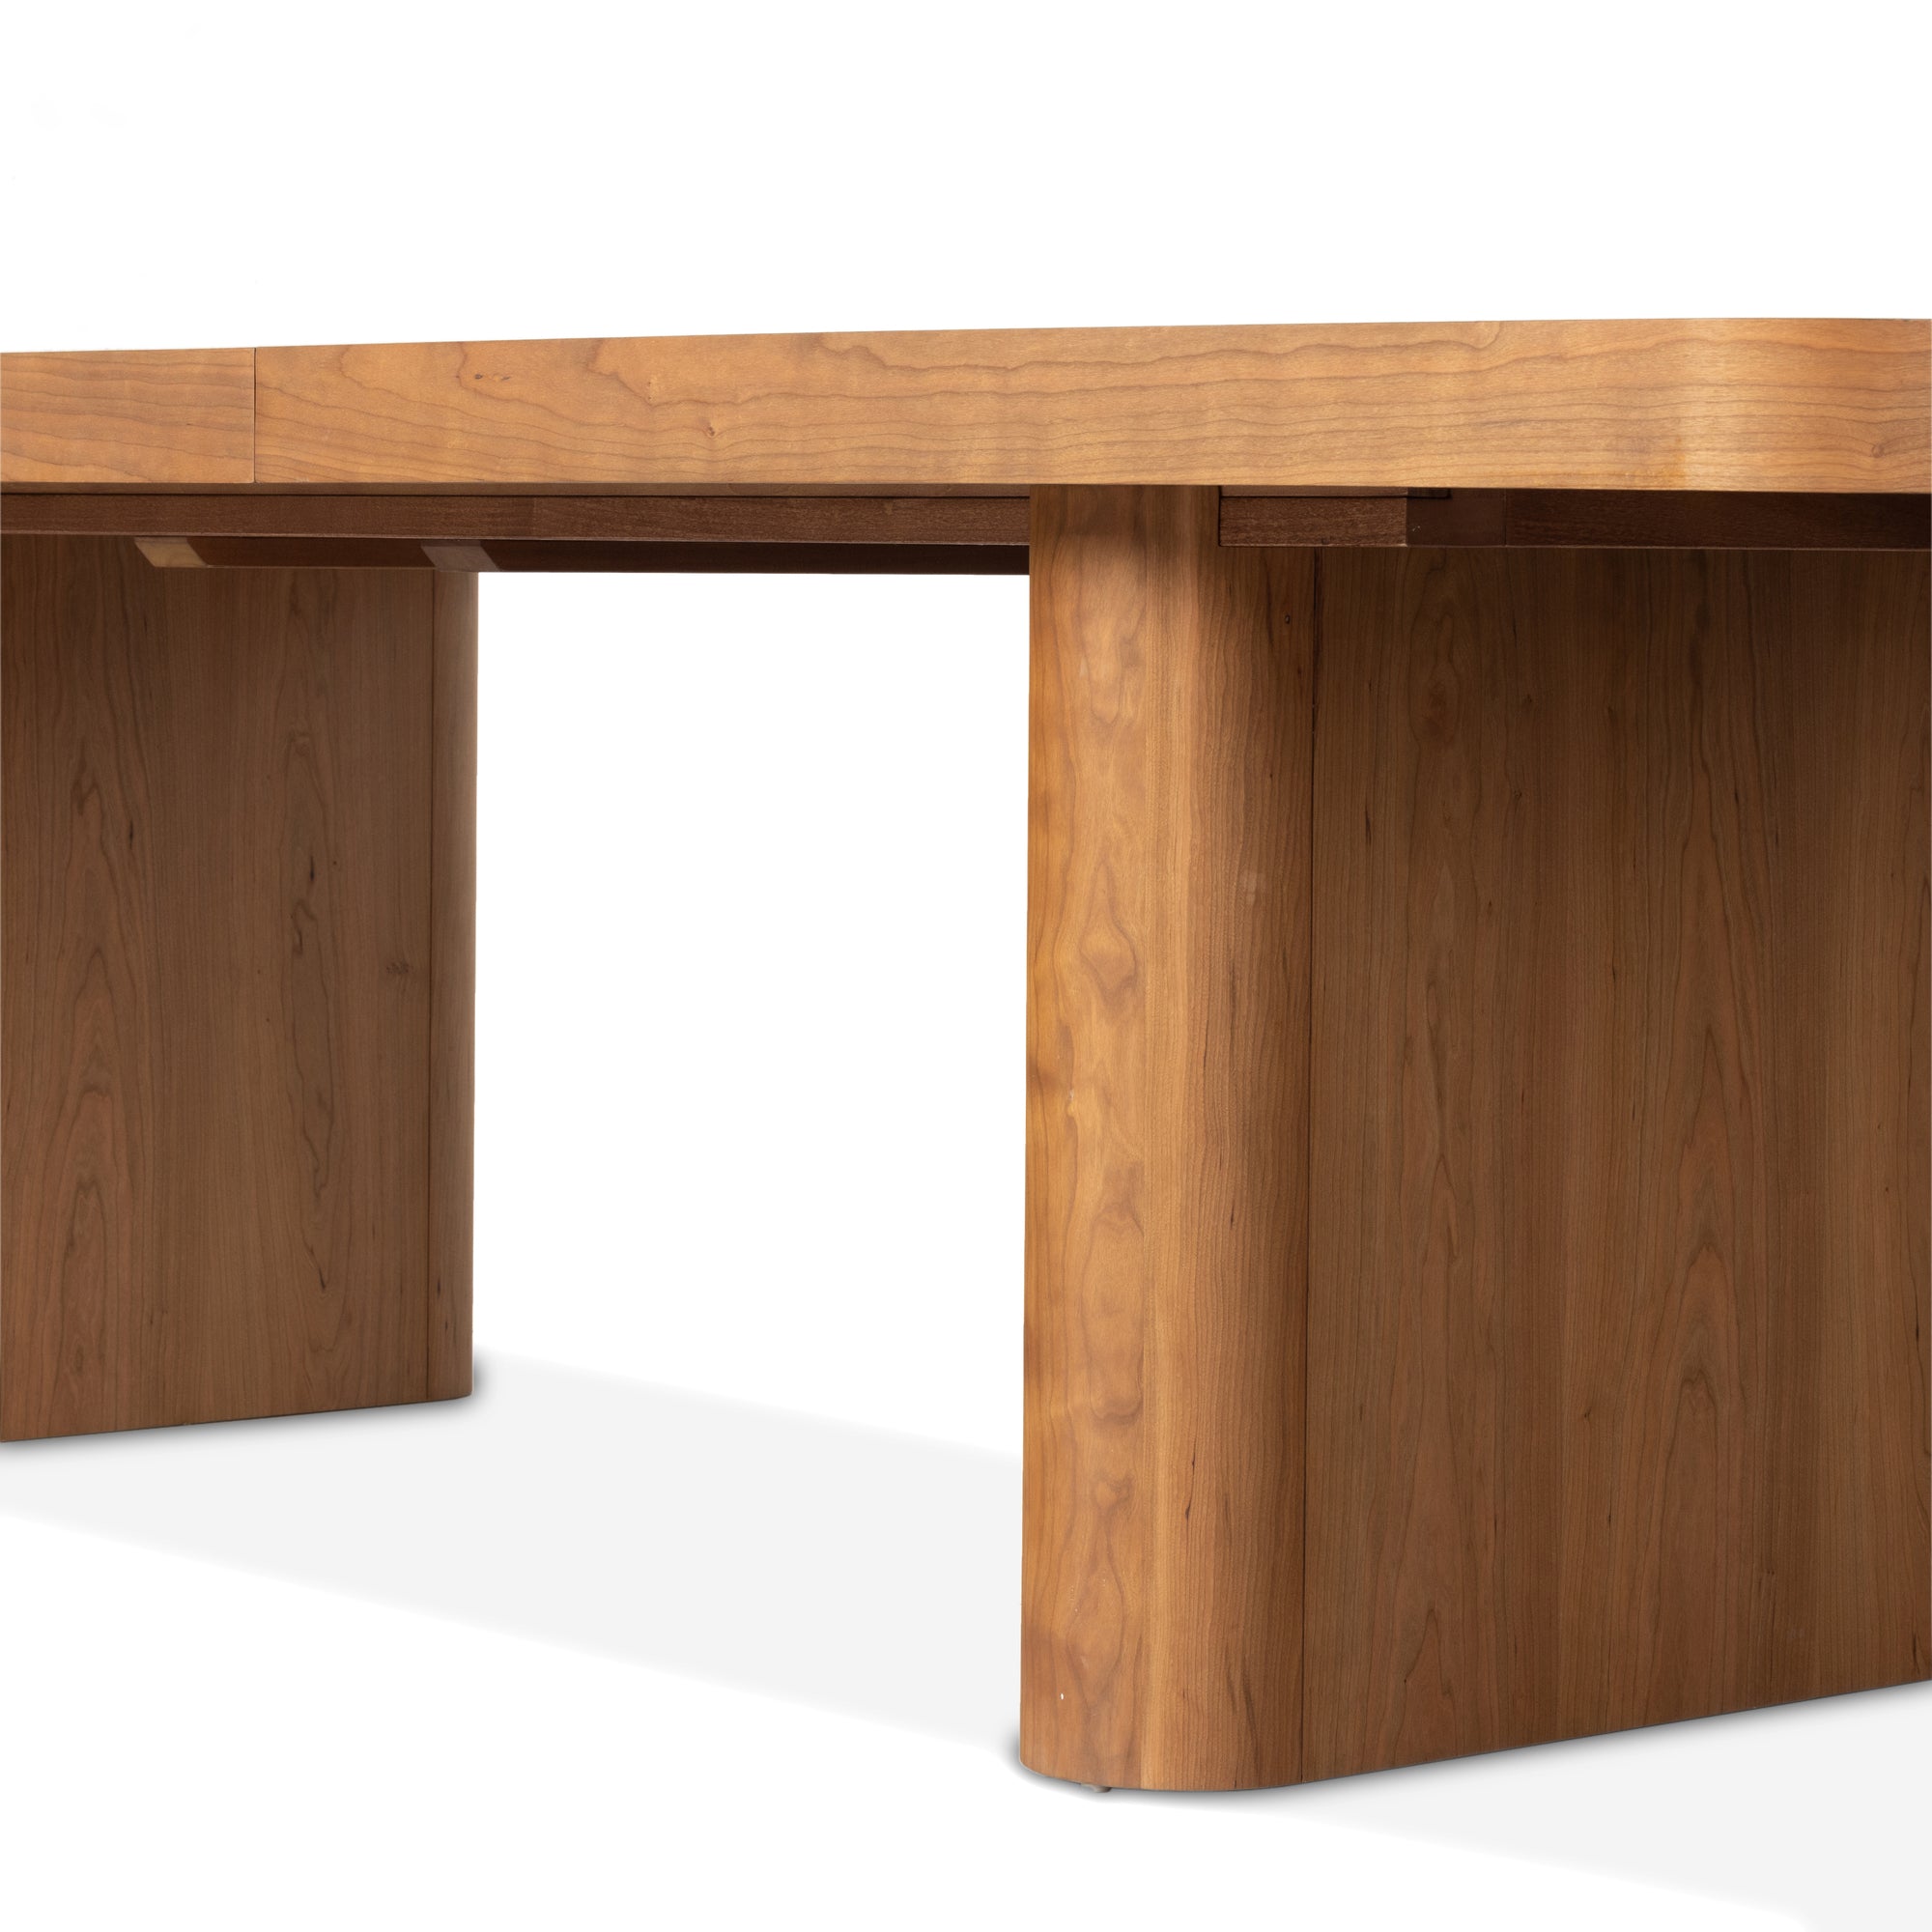 Rufina Extension Dining Table